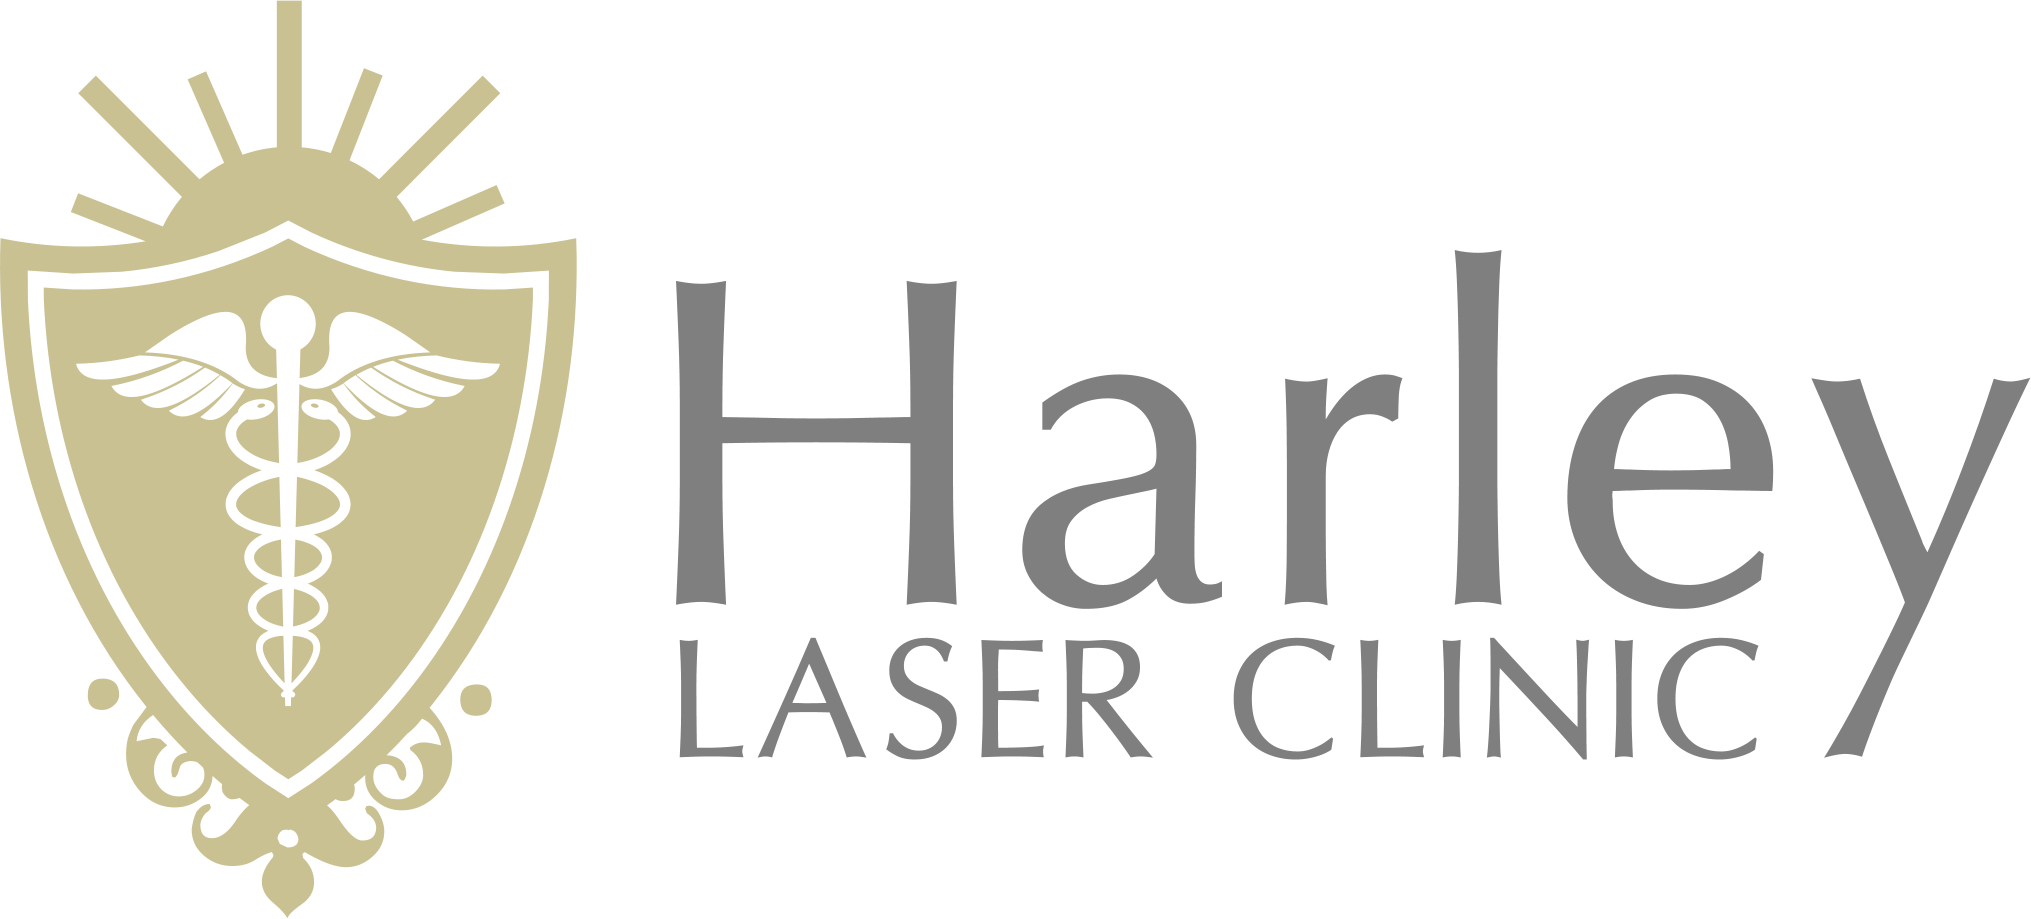 The Harley Laser Clinic